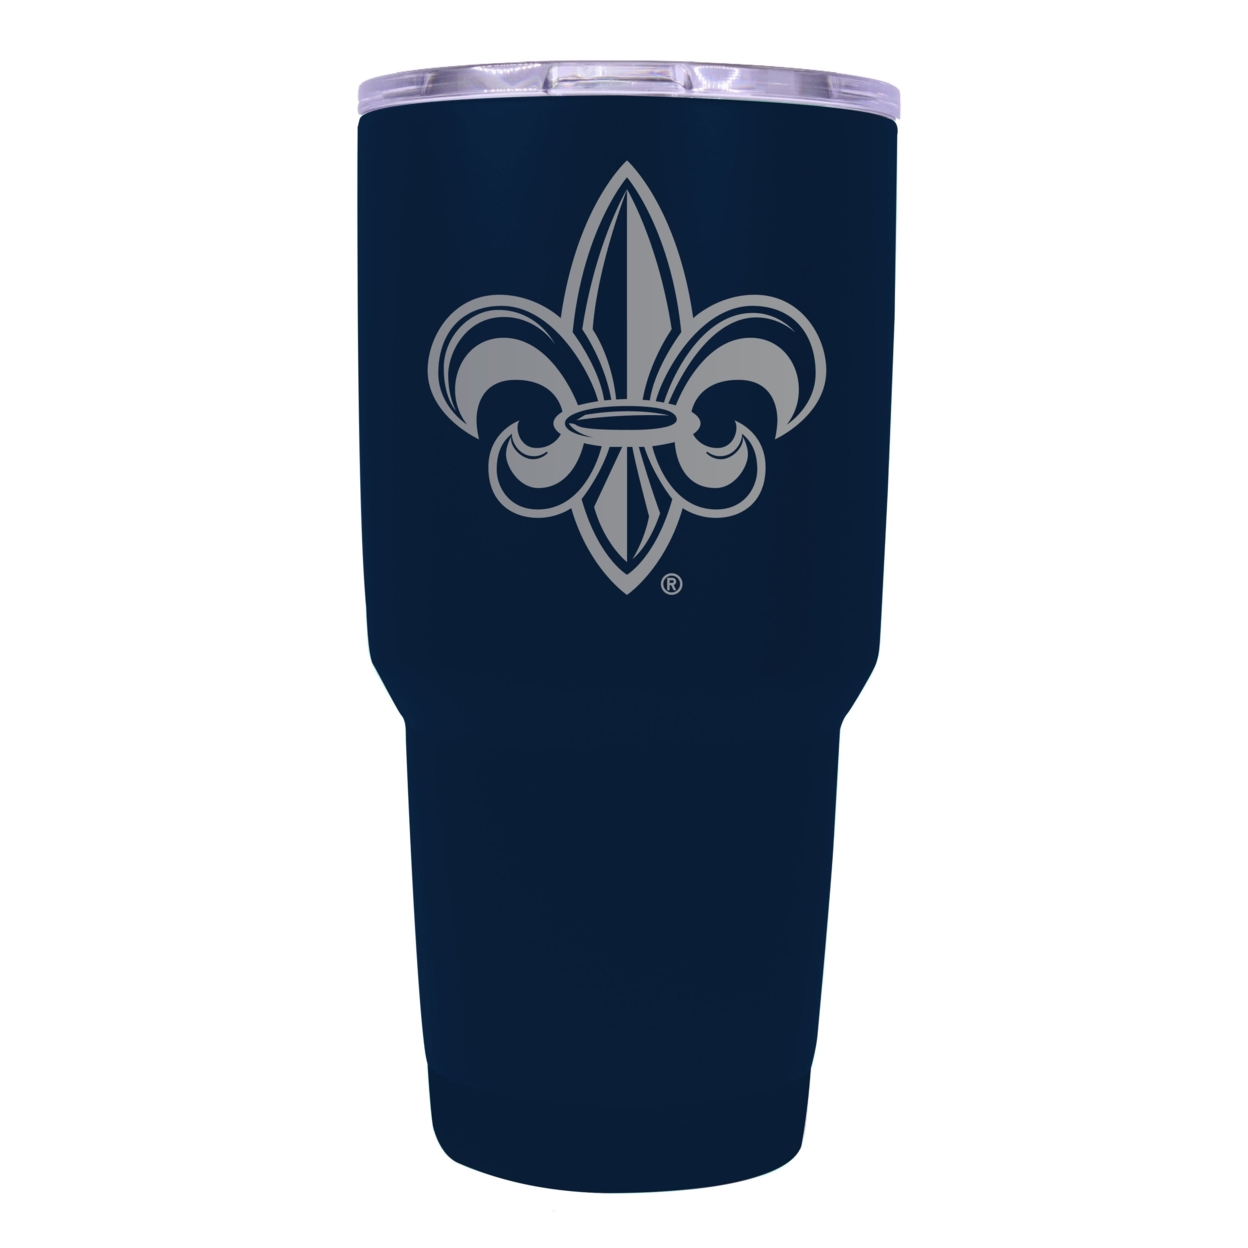 Louisiana At Lafayette 24 Oz Laser Engraved Stainless Steel Insulated Tumbler - Choose Your Color. - Navy